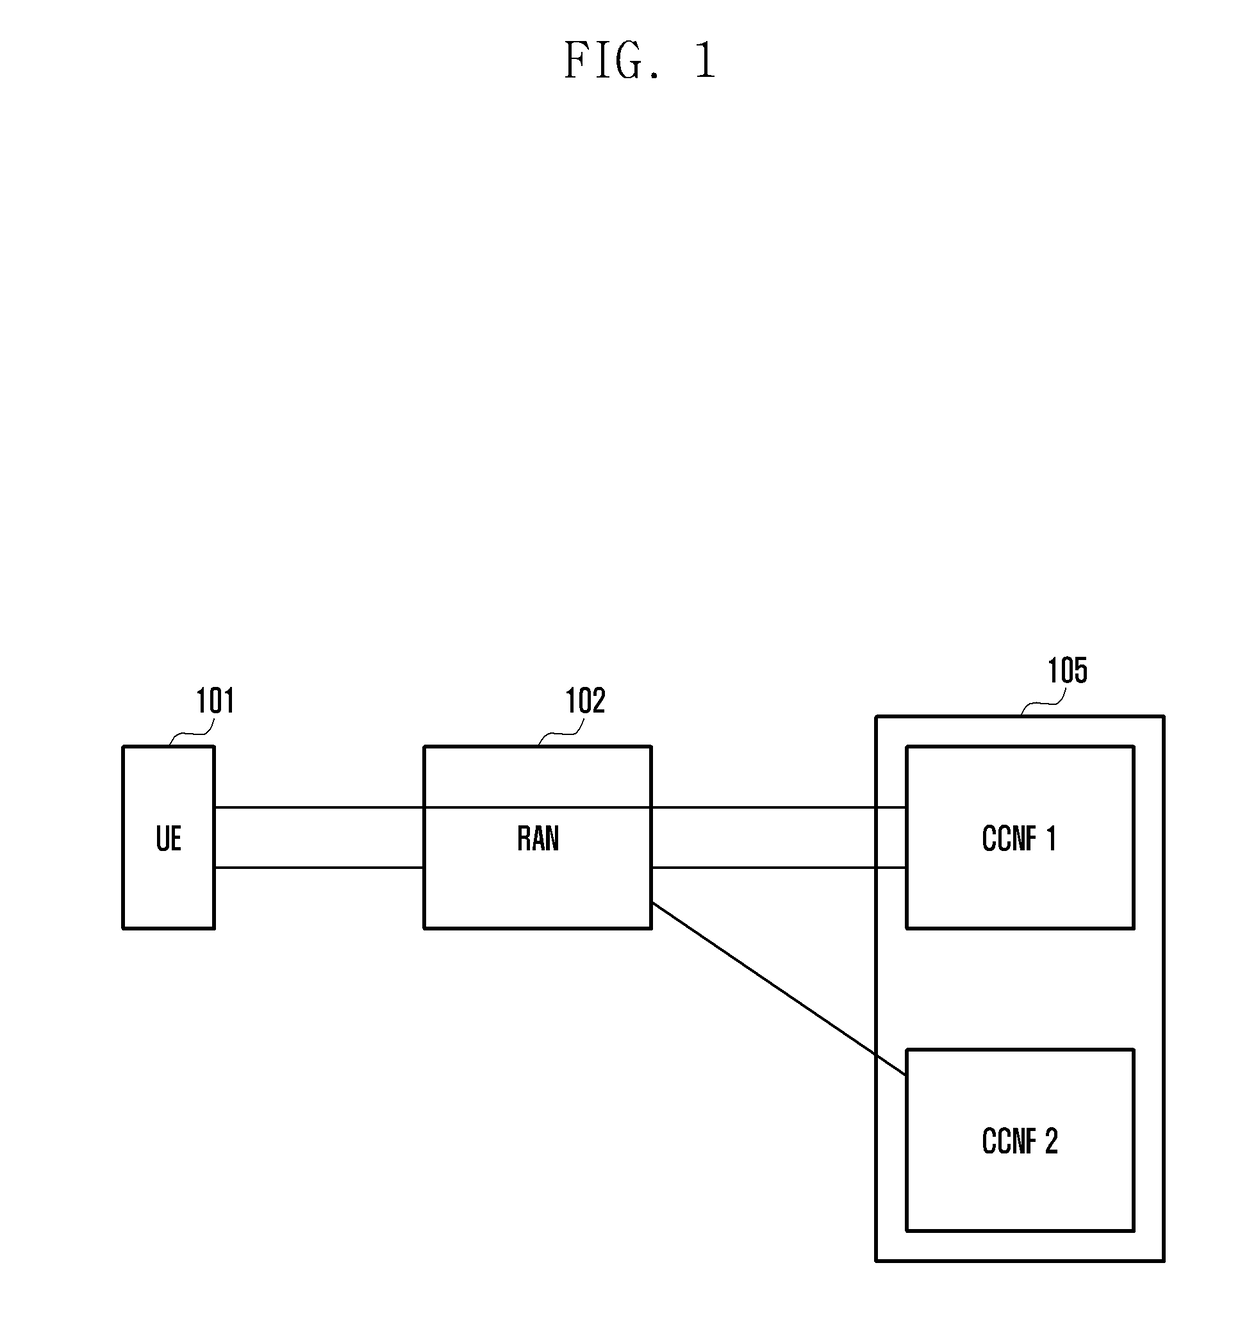 Method and apparatus for selecting an access and mobility management function in a mobile communication system